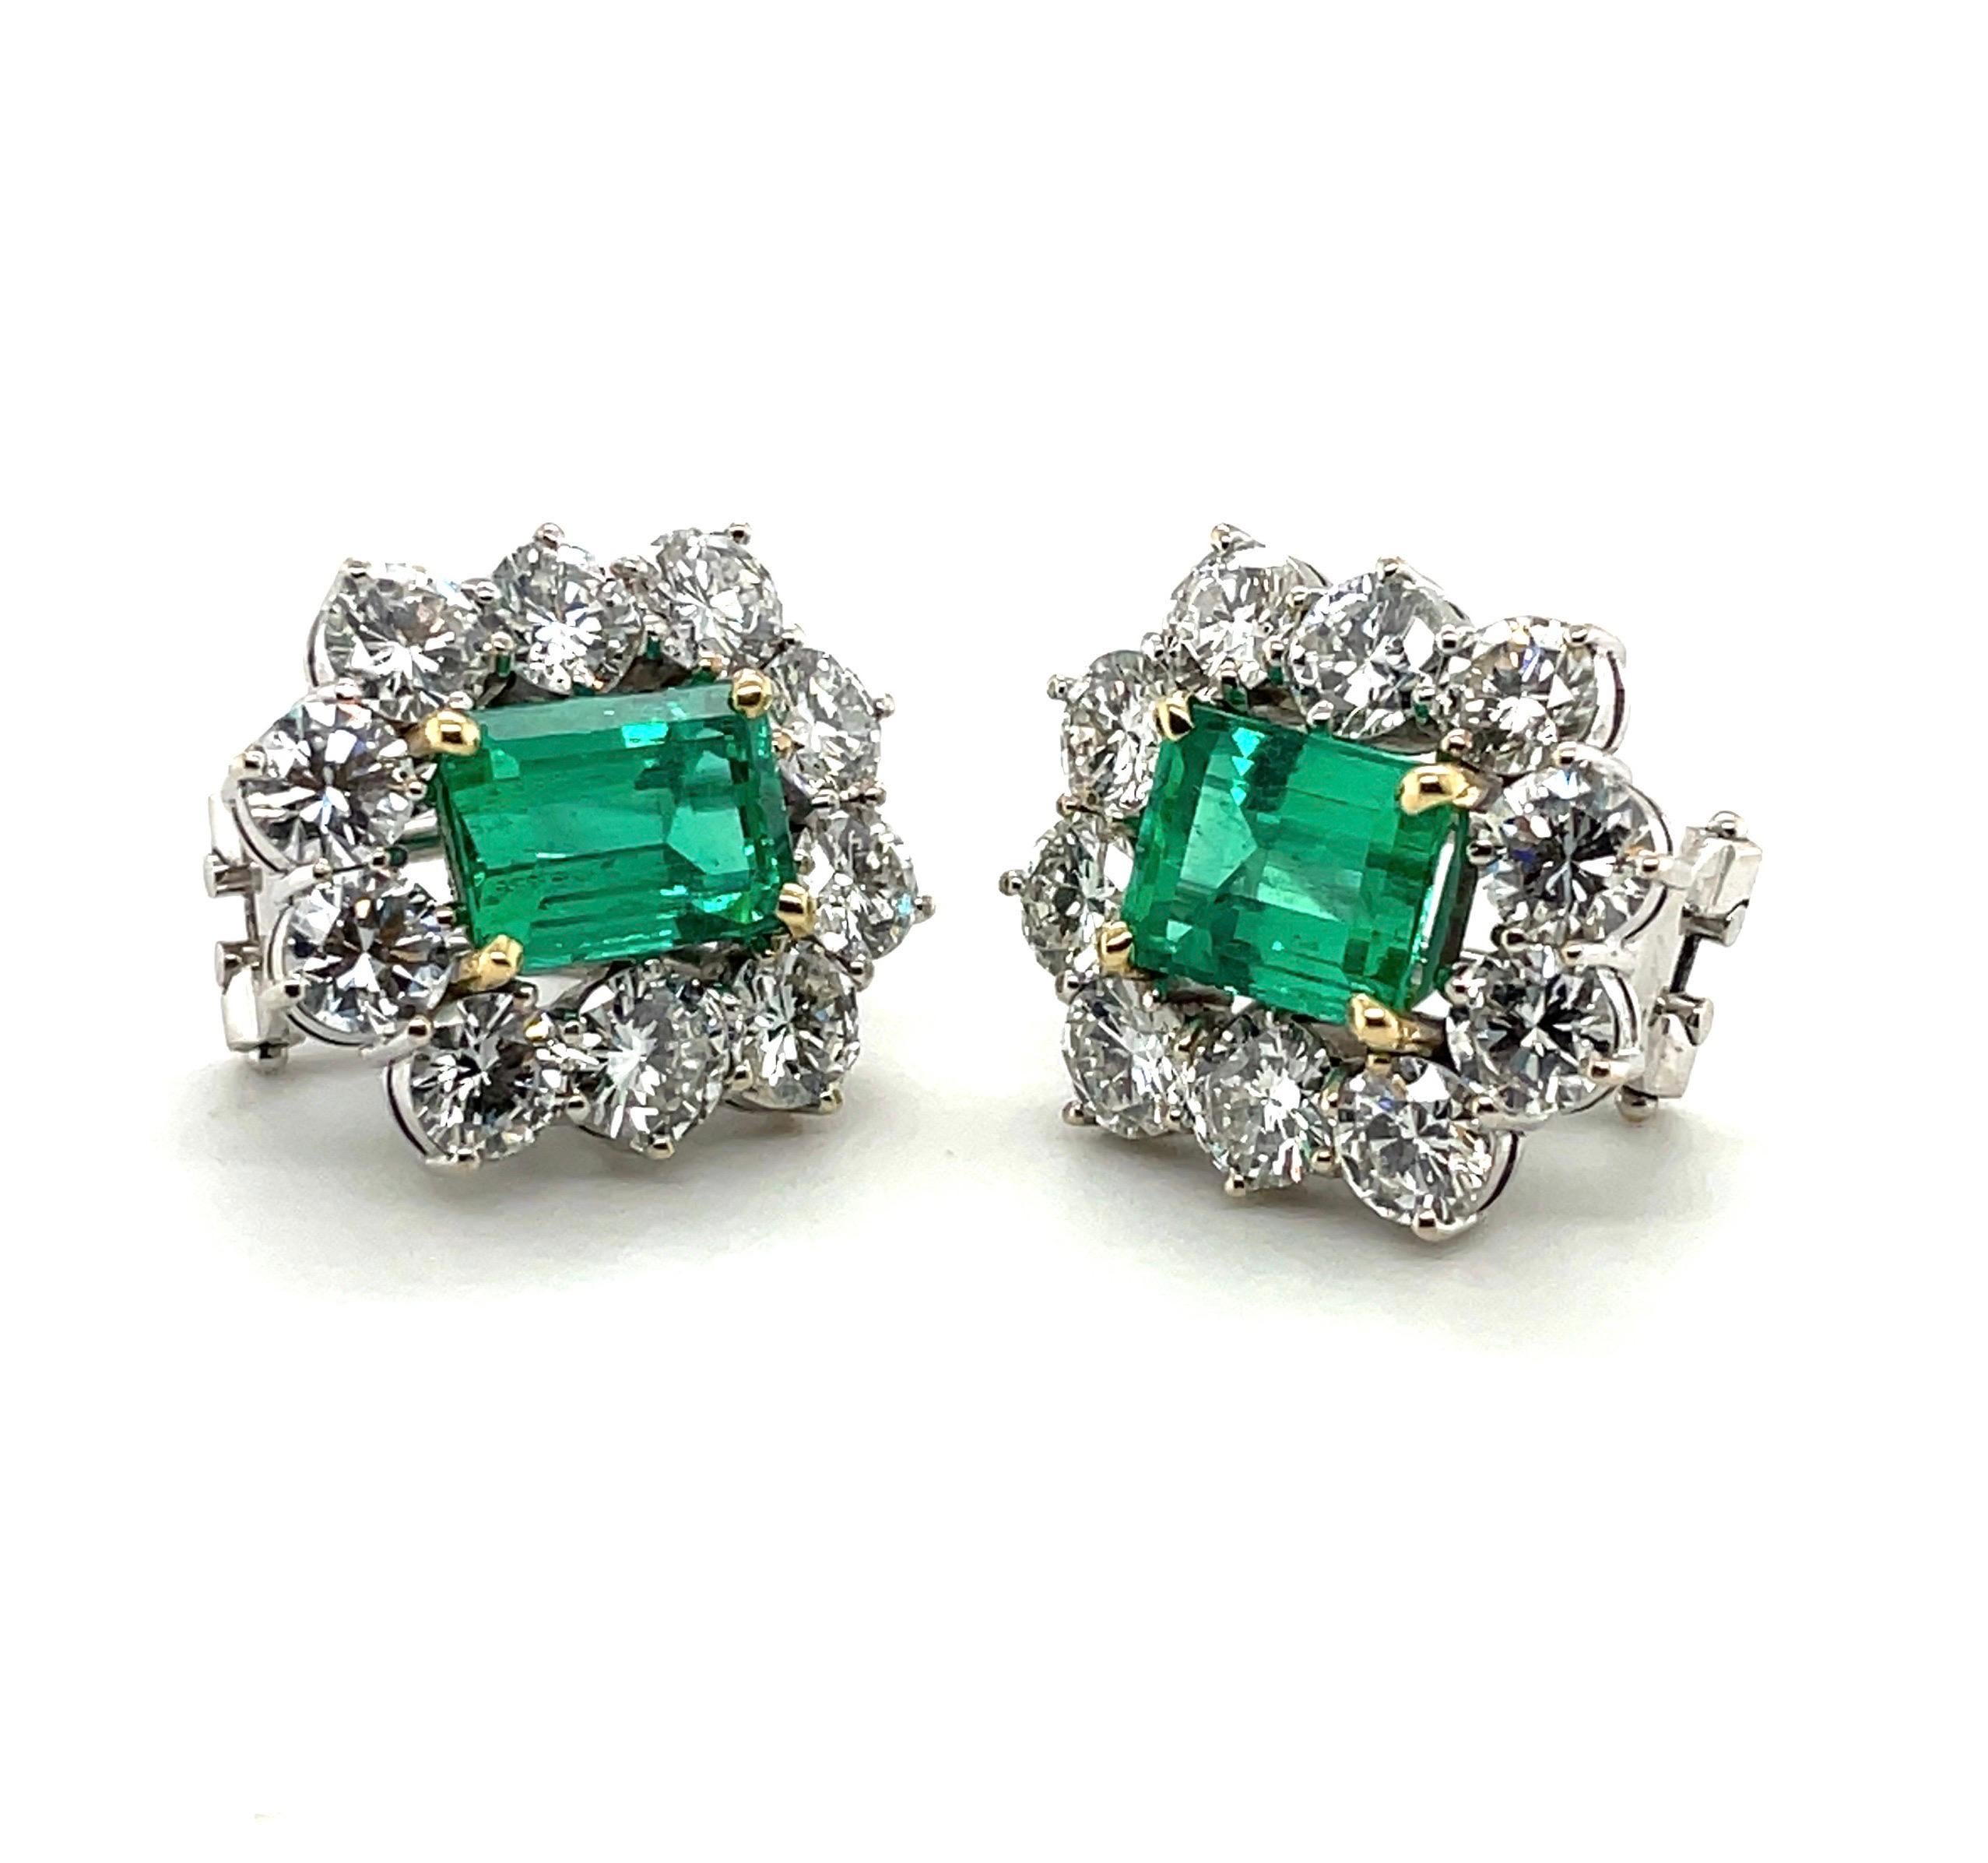 18 Karat White and Yellow Gold Colombian Emerald and Diamond Earrings  2